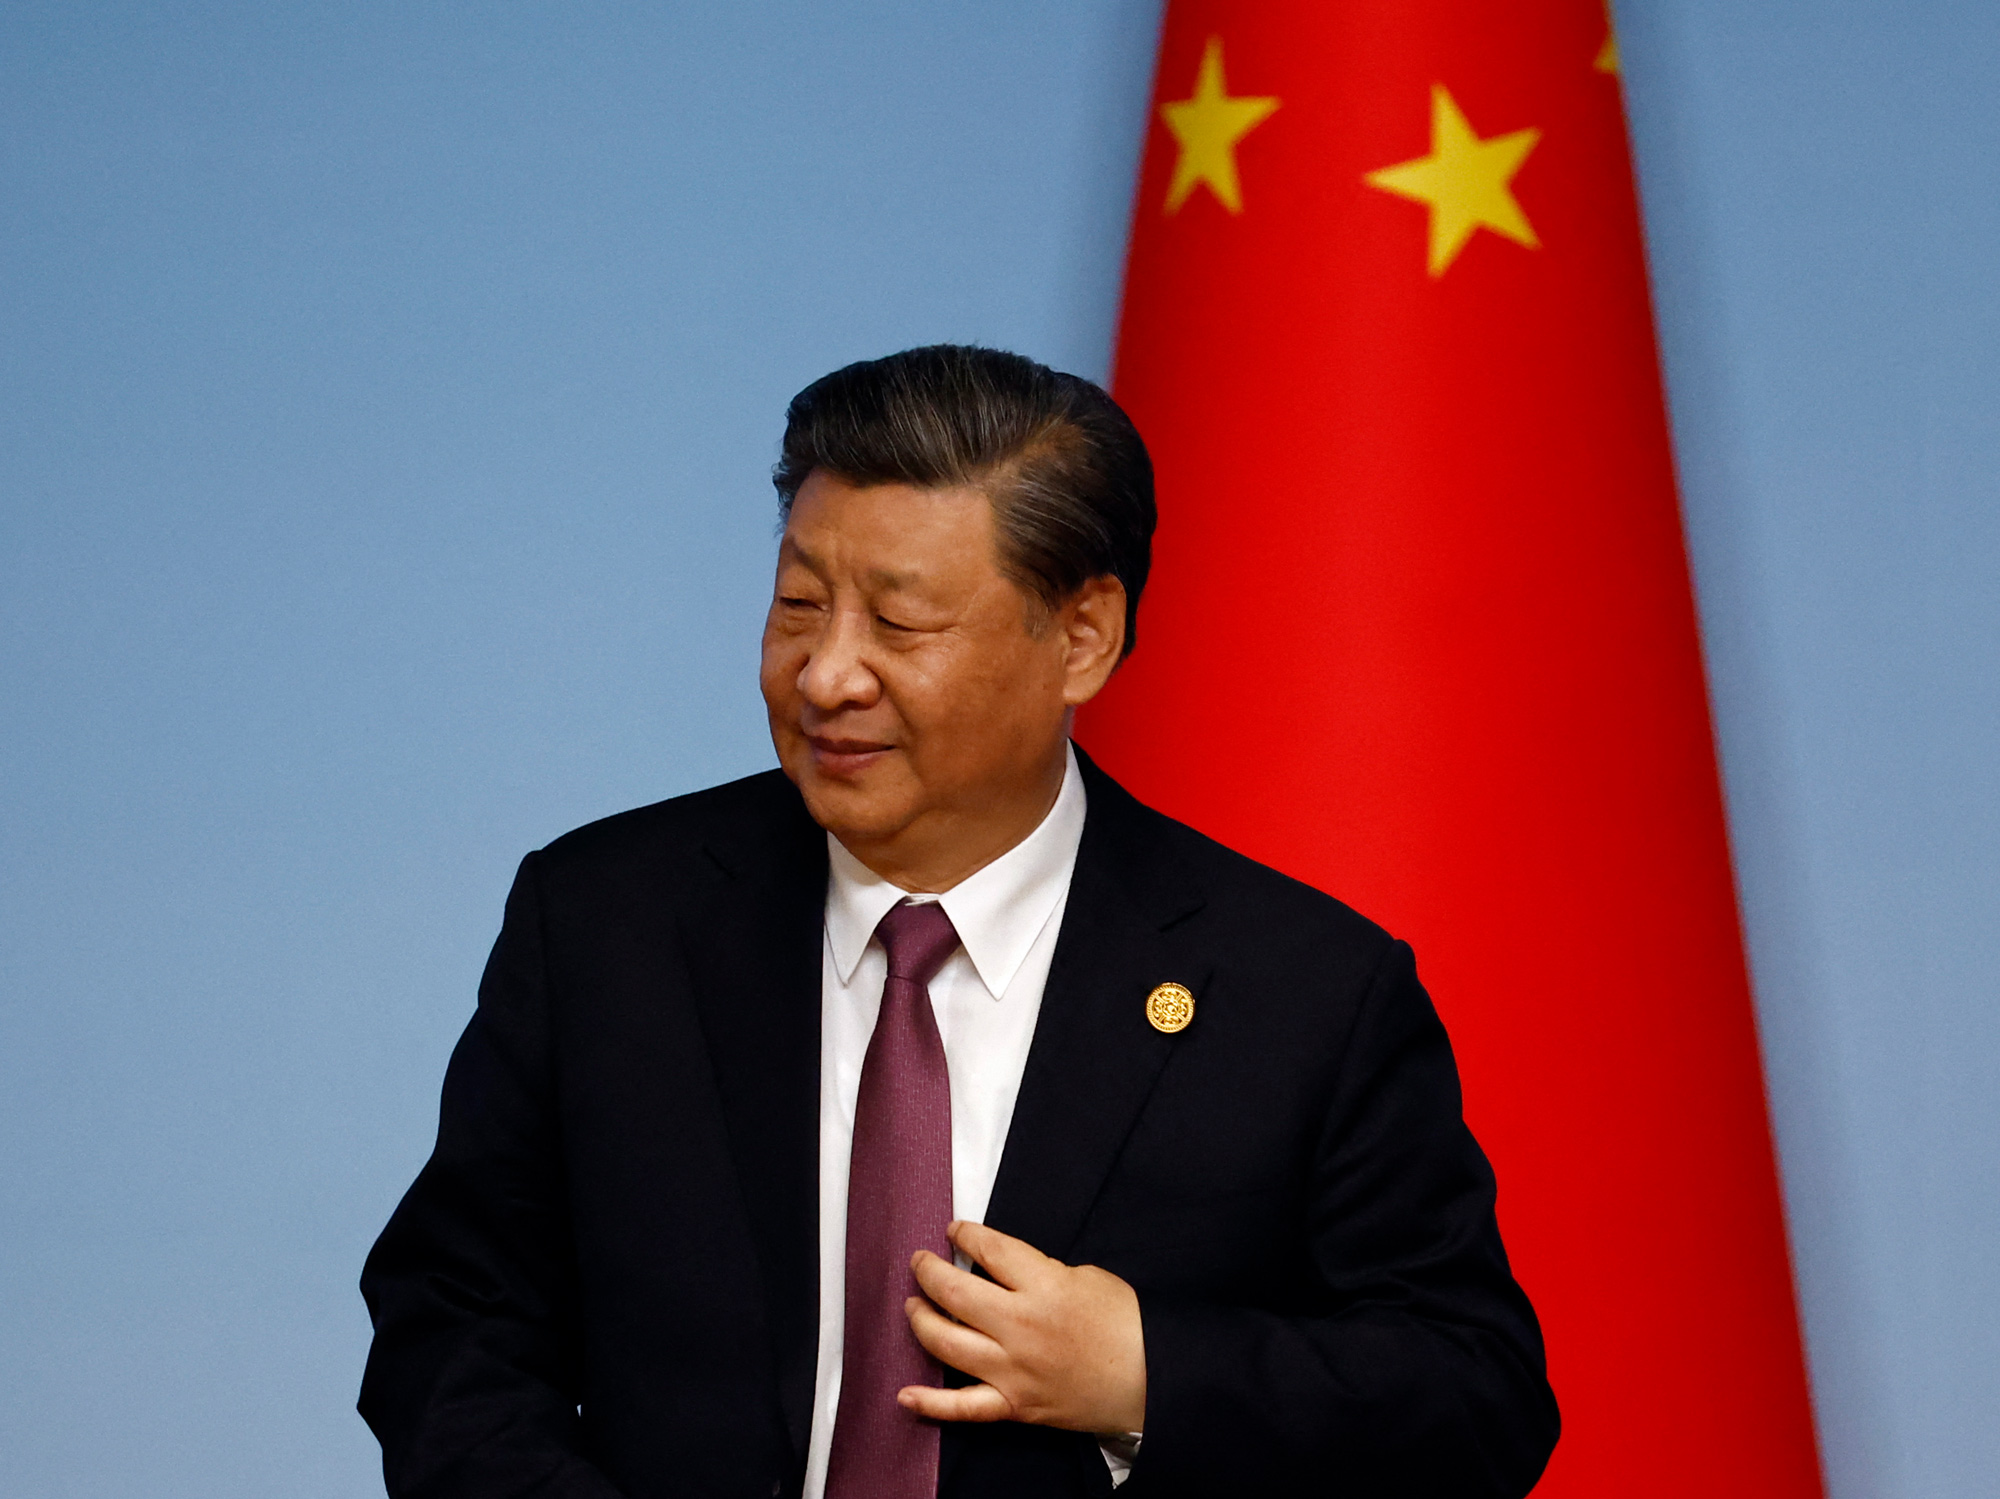 Xi Speak and Closed Doors Obscure China's $18 Trillion Economy